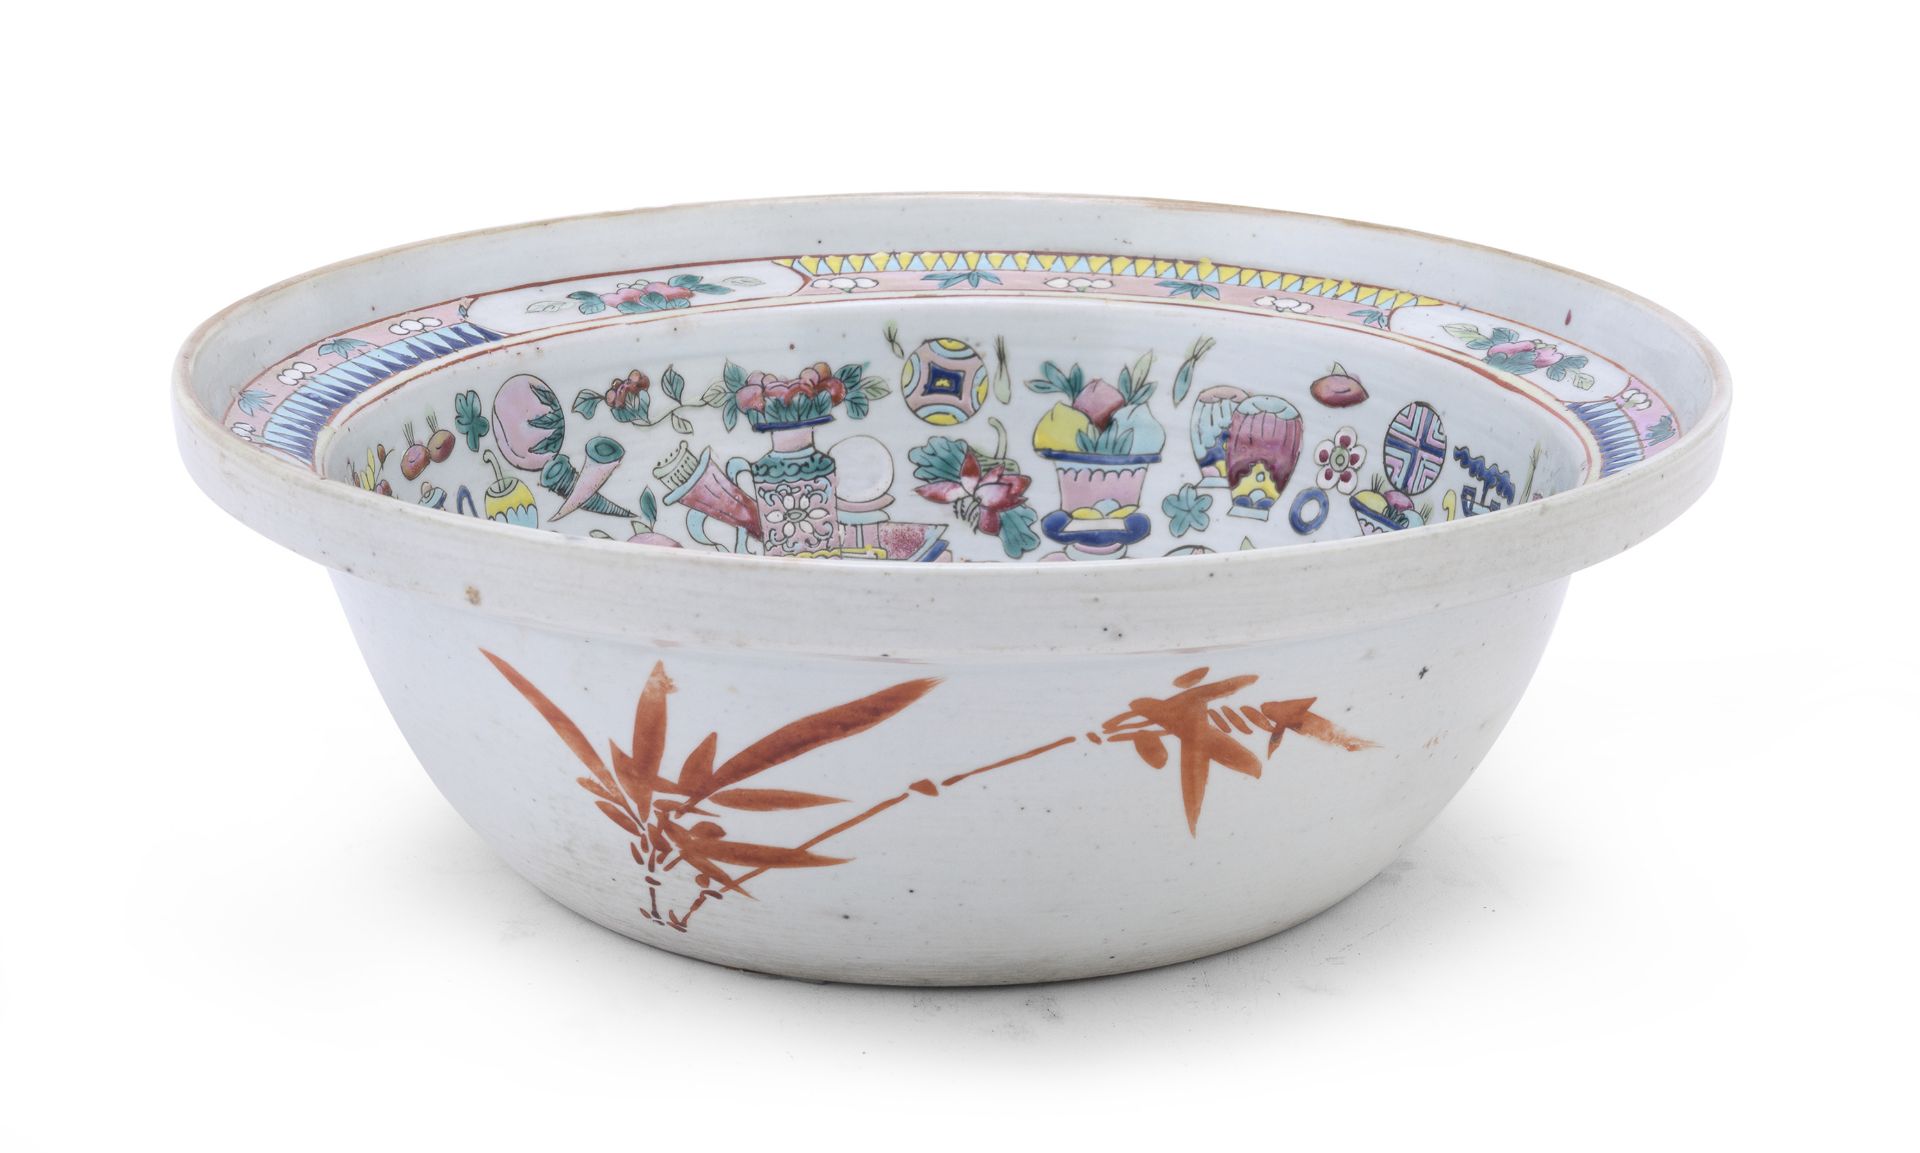 A LARGE POLYCHROME DECORATED PORCELAIN BOWL CHINA 19TH CENTURY - Image 2 of 2